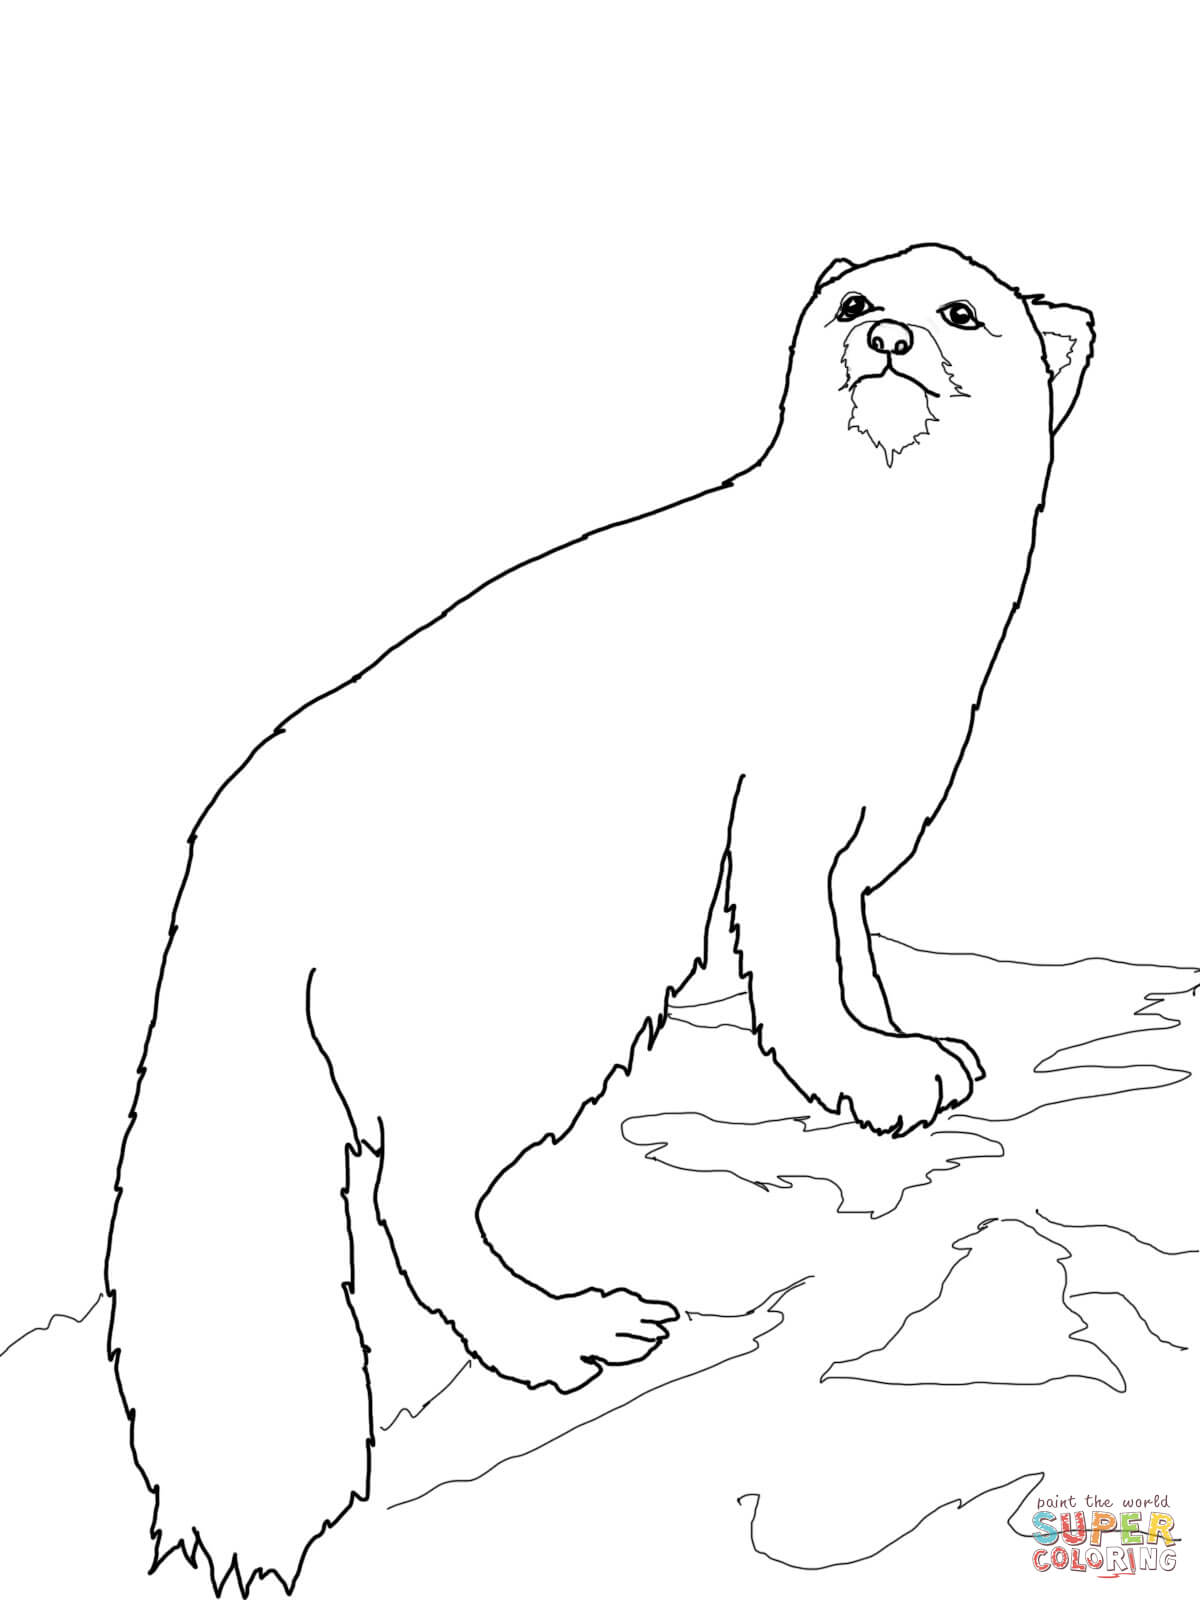 Arctic Fox coloring pages | Free Coloring Pages